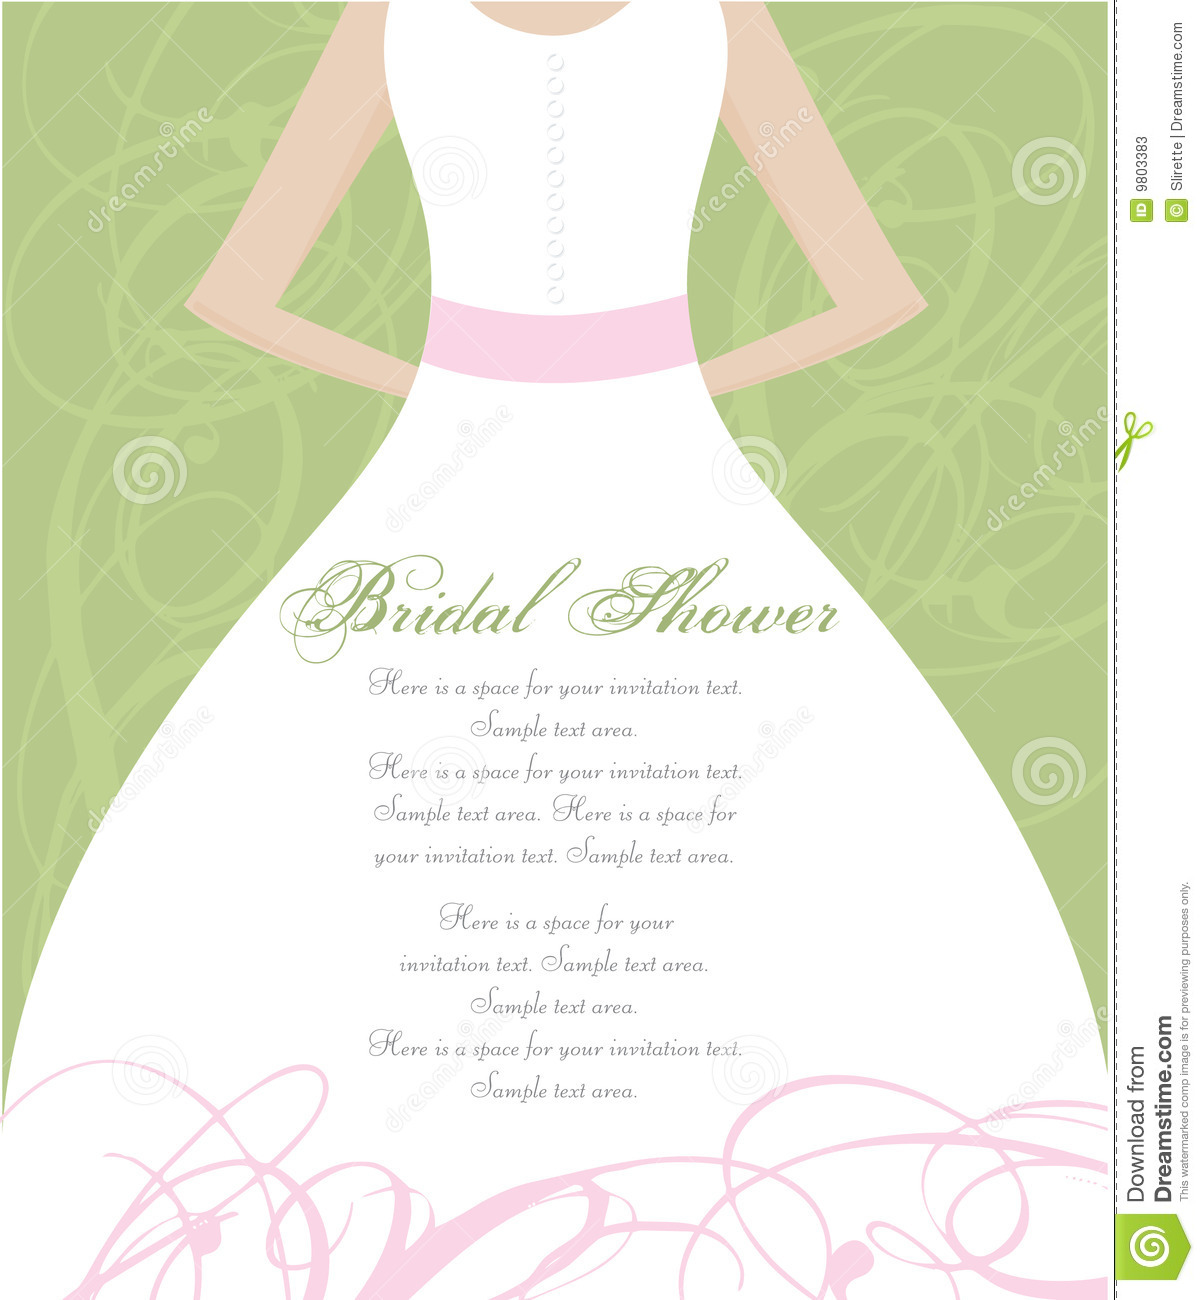 Invitation Panel To Use For Bridal Shower Or Any Wedding Related